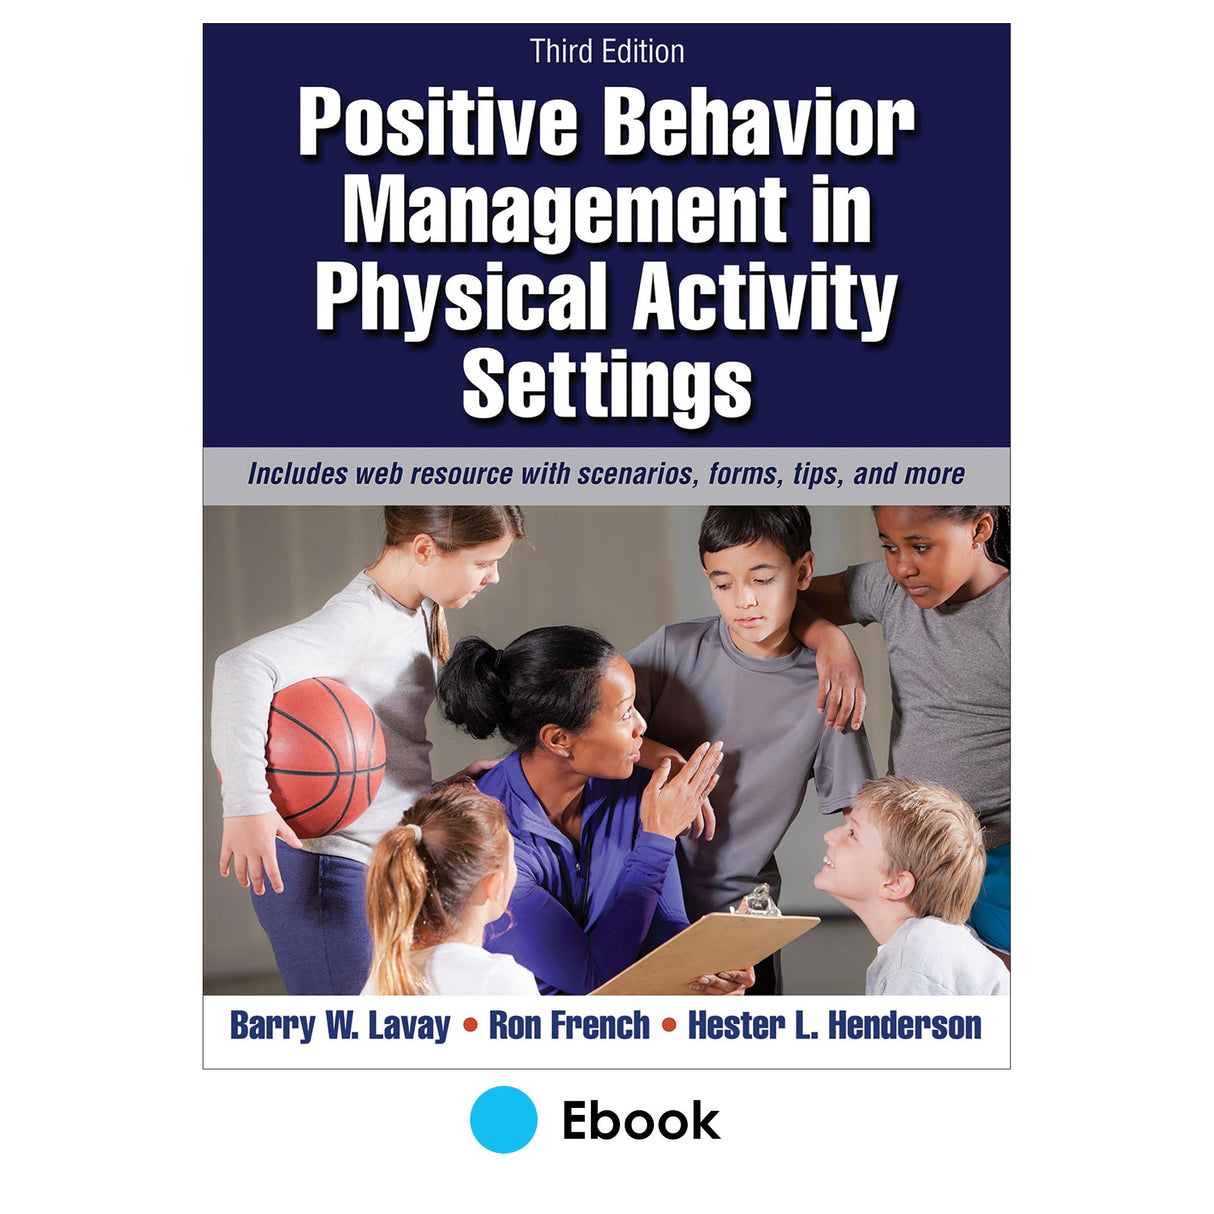 Positive Behavior Management in Physical Activity Settings 3rd Edition PDF With Web Resource